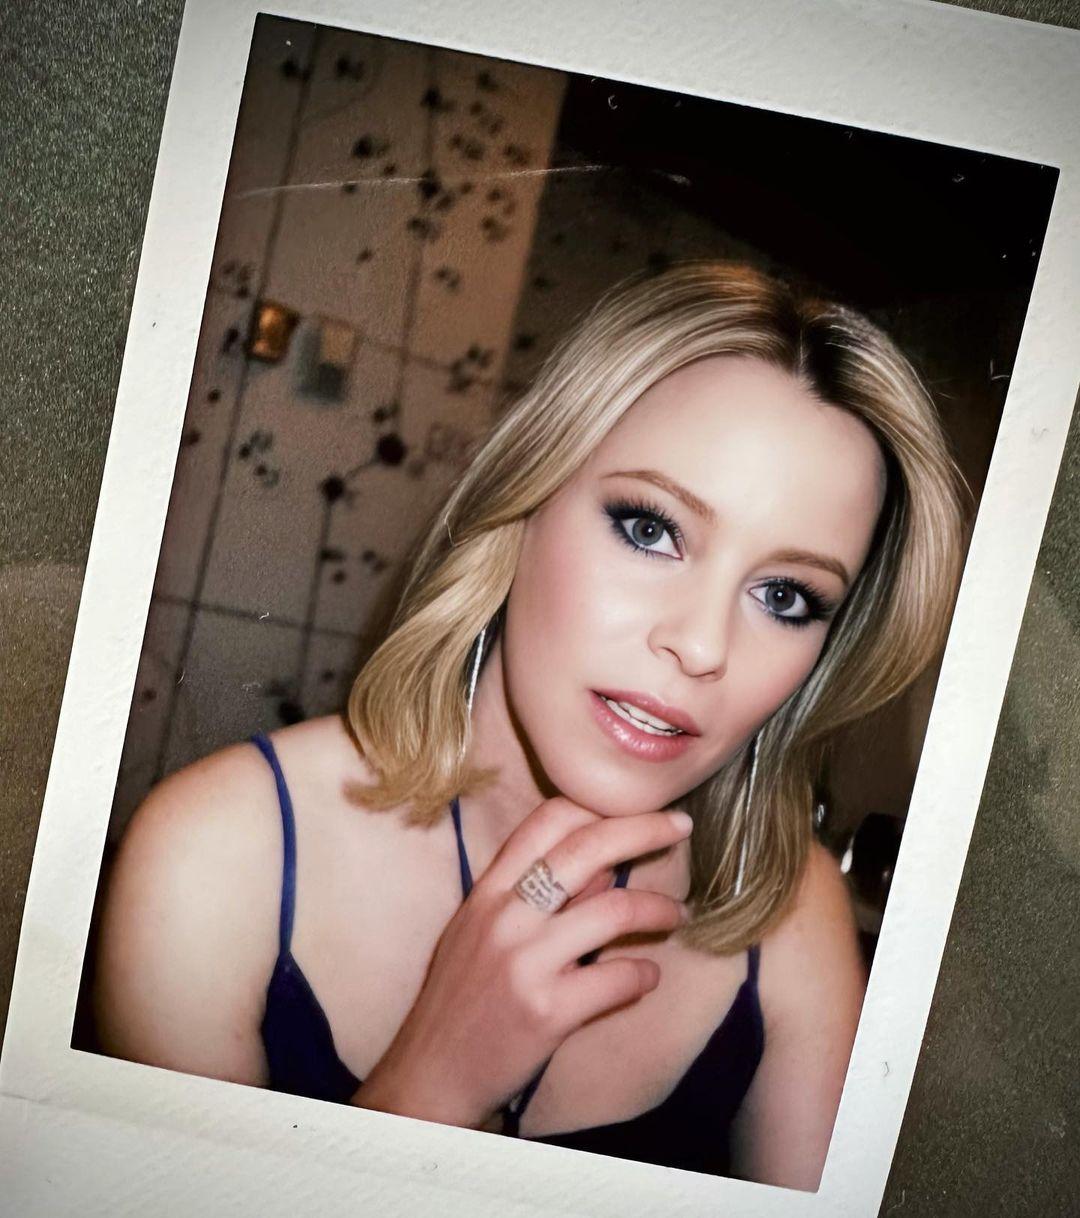 class="content__text"
 Navy smoke and lashes for @elizabethbanks@fallontonight 💙
 #makeup by me
 #hair and photo by @benskervin 
 #styling by @wendiandnicole 

 #elizabethbanks #fallon @cocainebear #cocianebear #navysmokeyeye #makeupbygita #gitabass @thewallgroup ✨ 
 